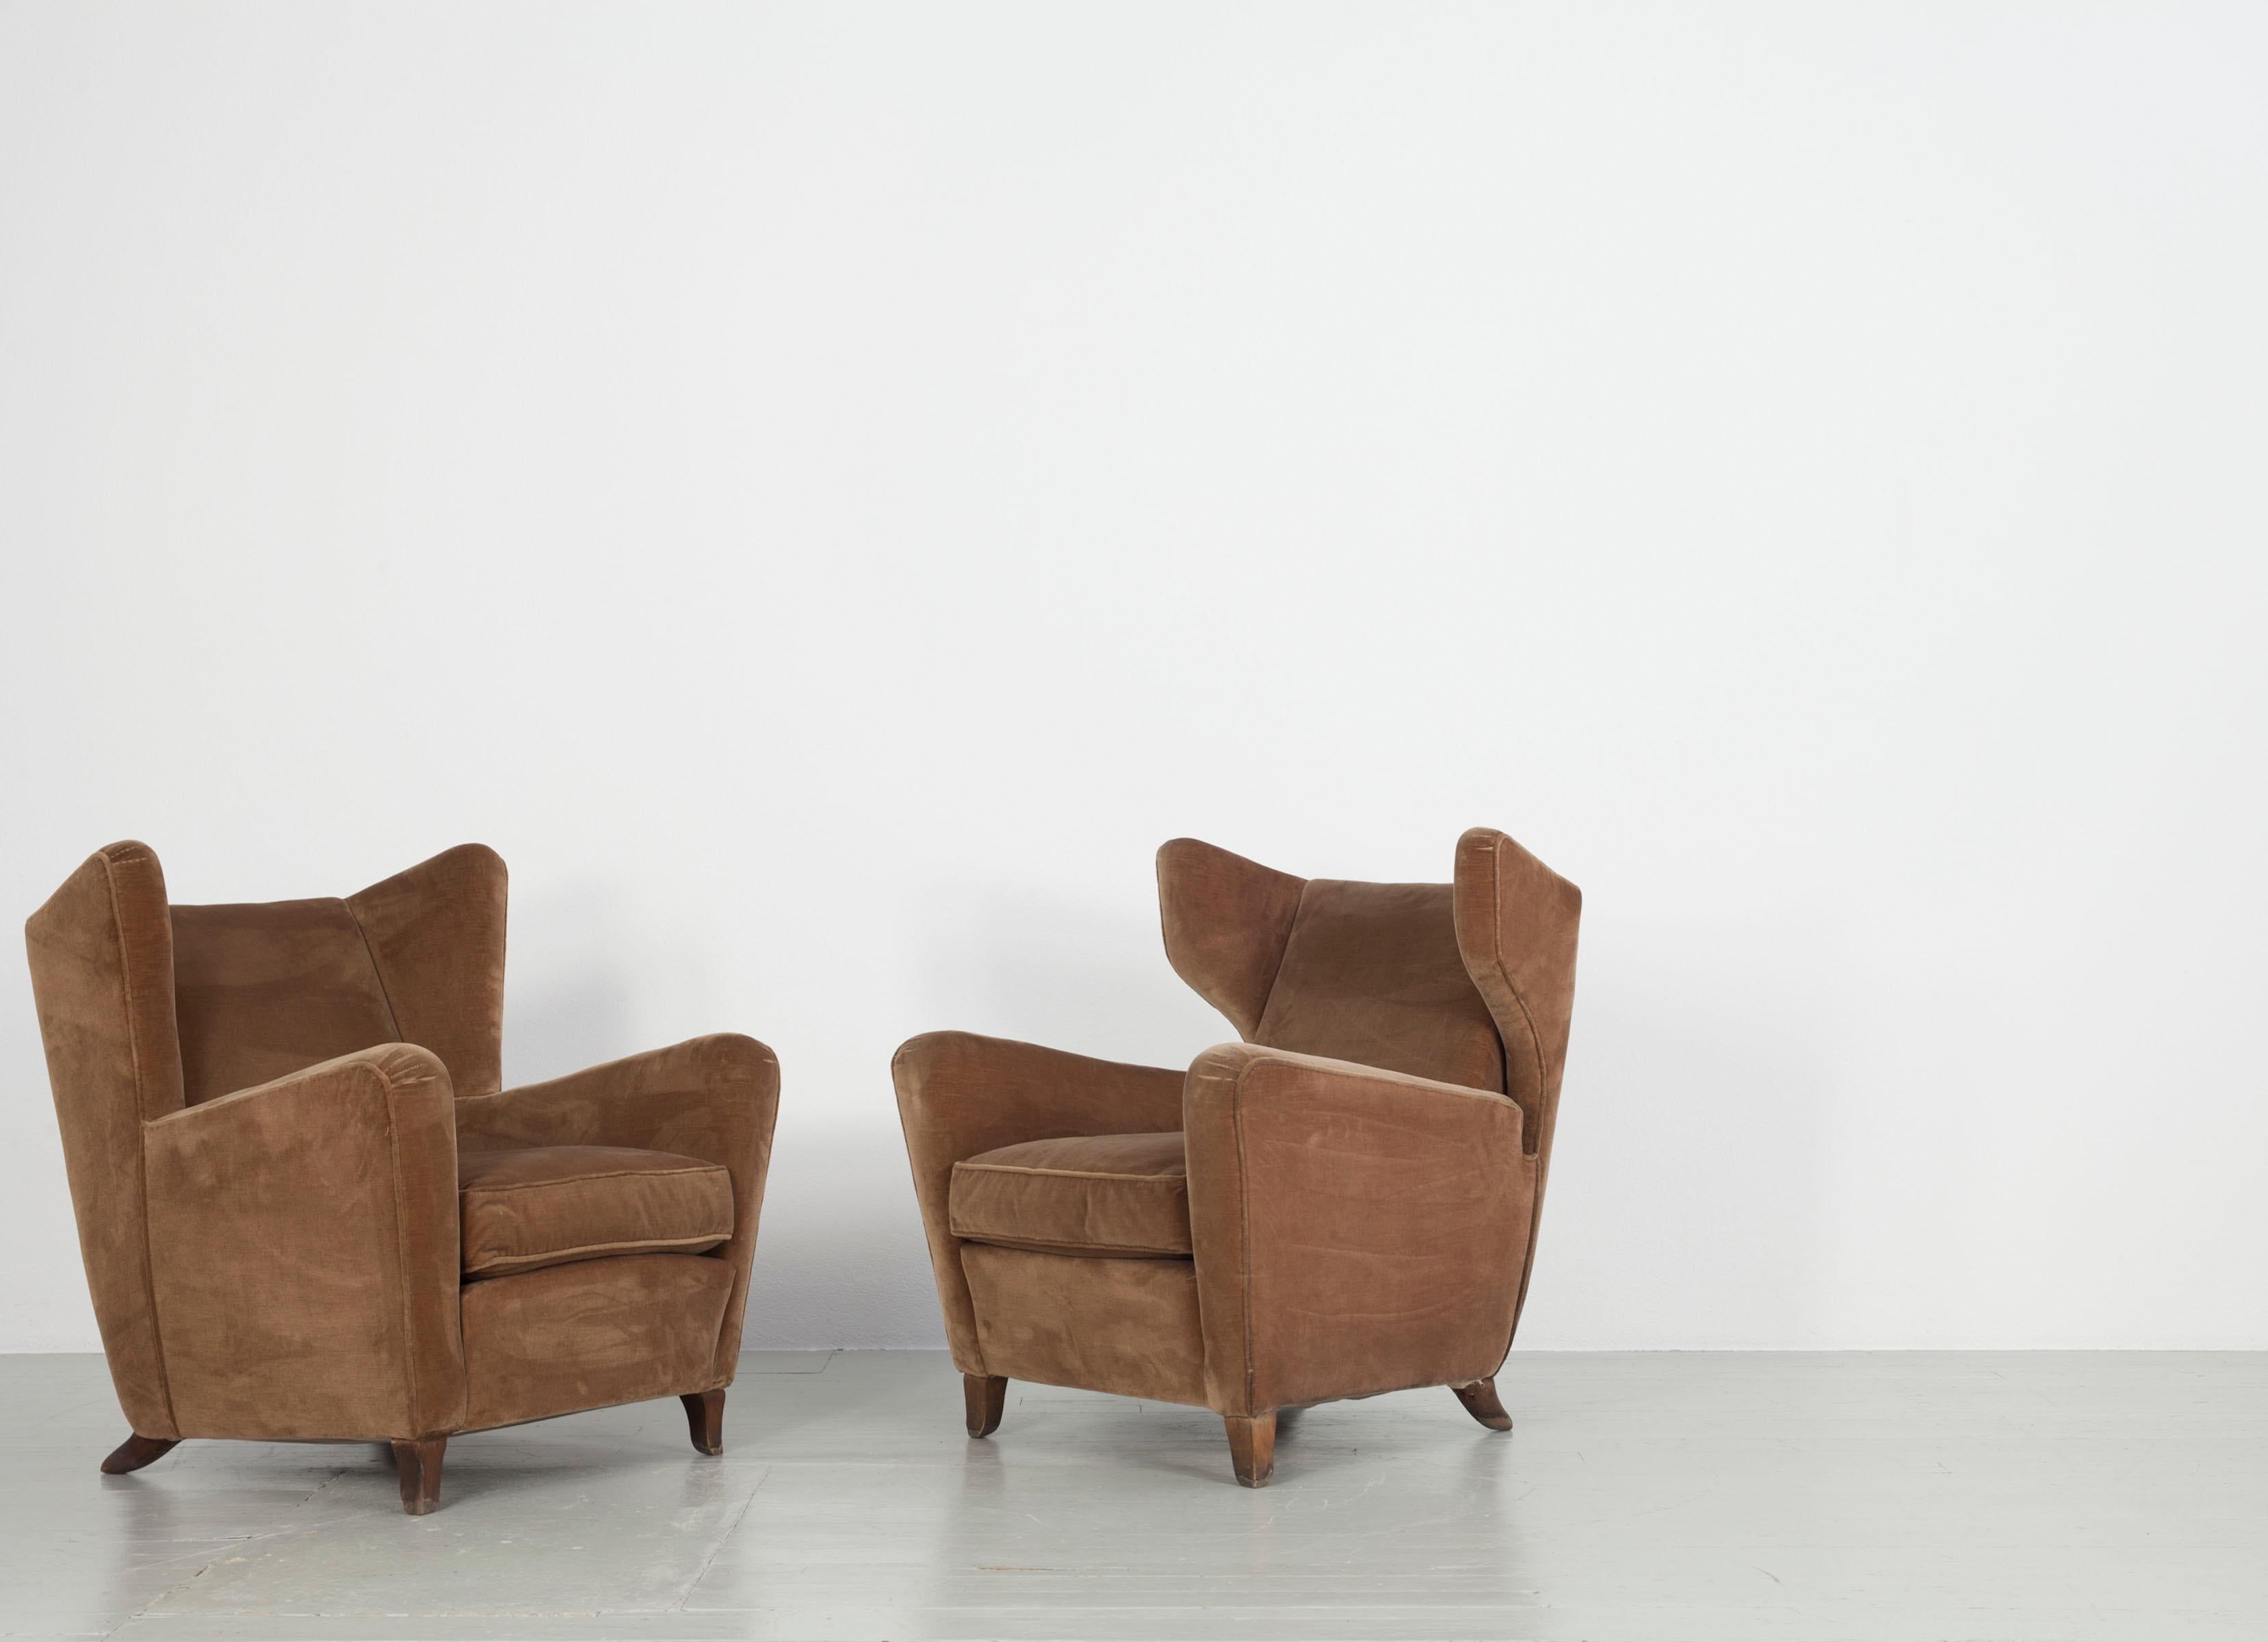 Set of Three Velvet Armchair, Melchiorre Bega Attributed, Italy, 1950s For Sale 1